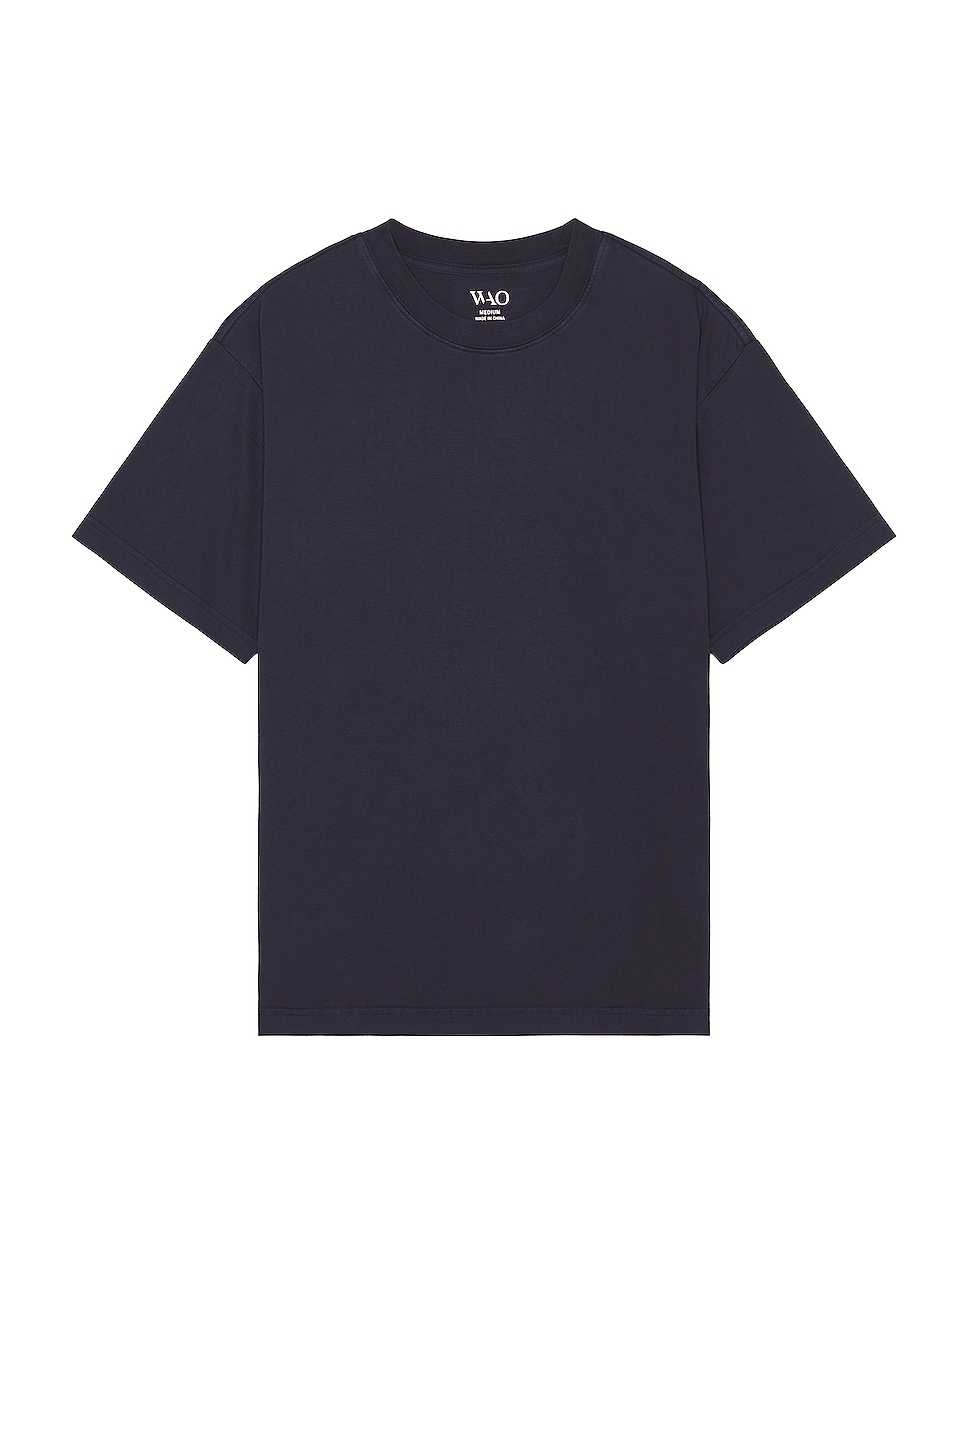 Image 1 of WAO The Relaxed Tee in navy